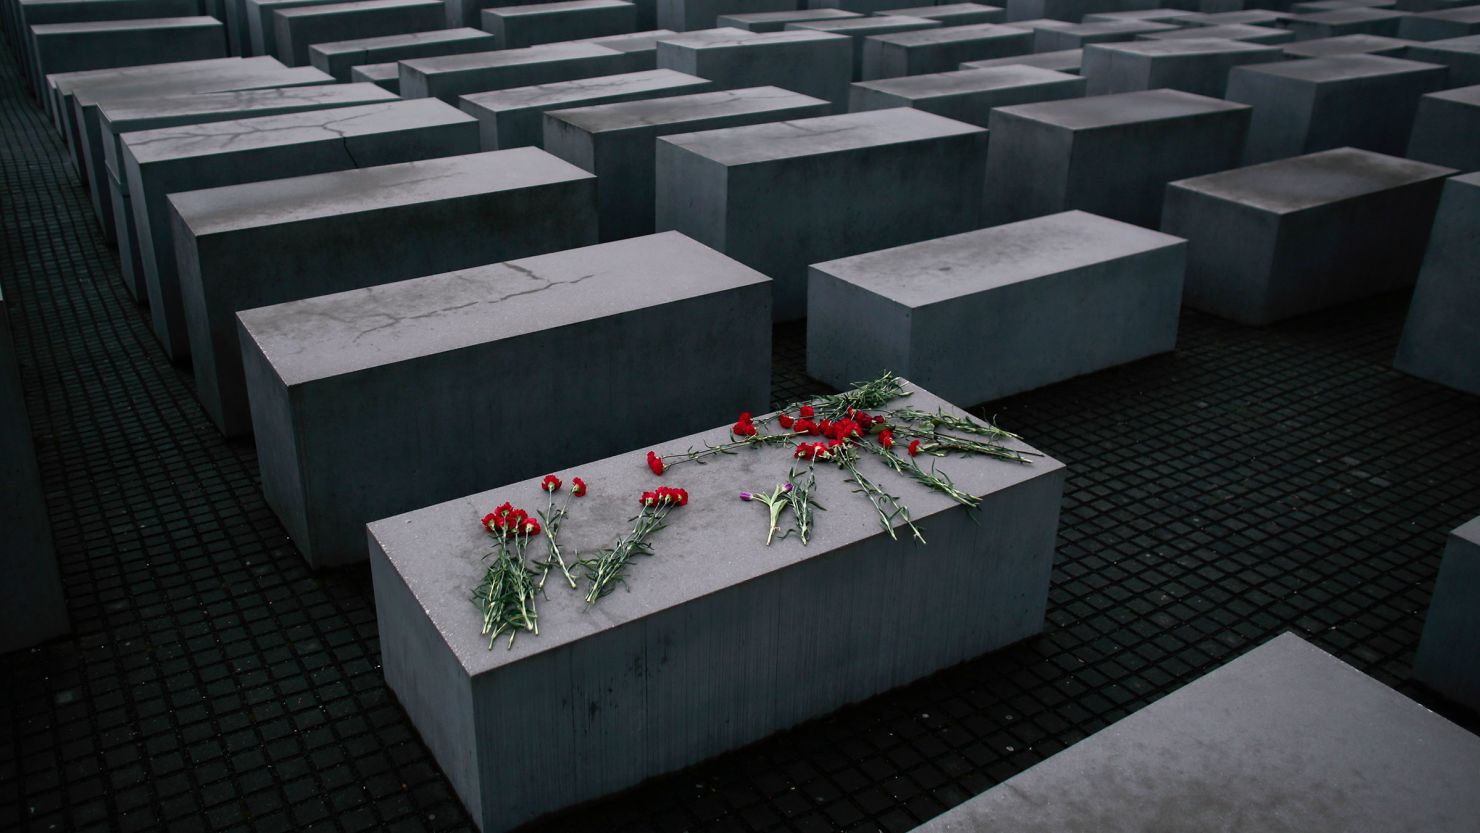 Berlin's Holocaust Memorial, pictured on the 70th anniversary of the liberation of the Nazi Auschwitz death camp, in 2015.